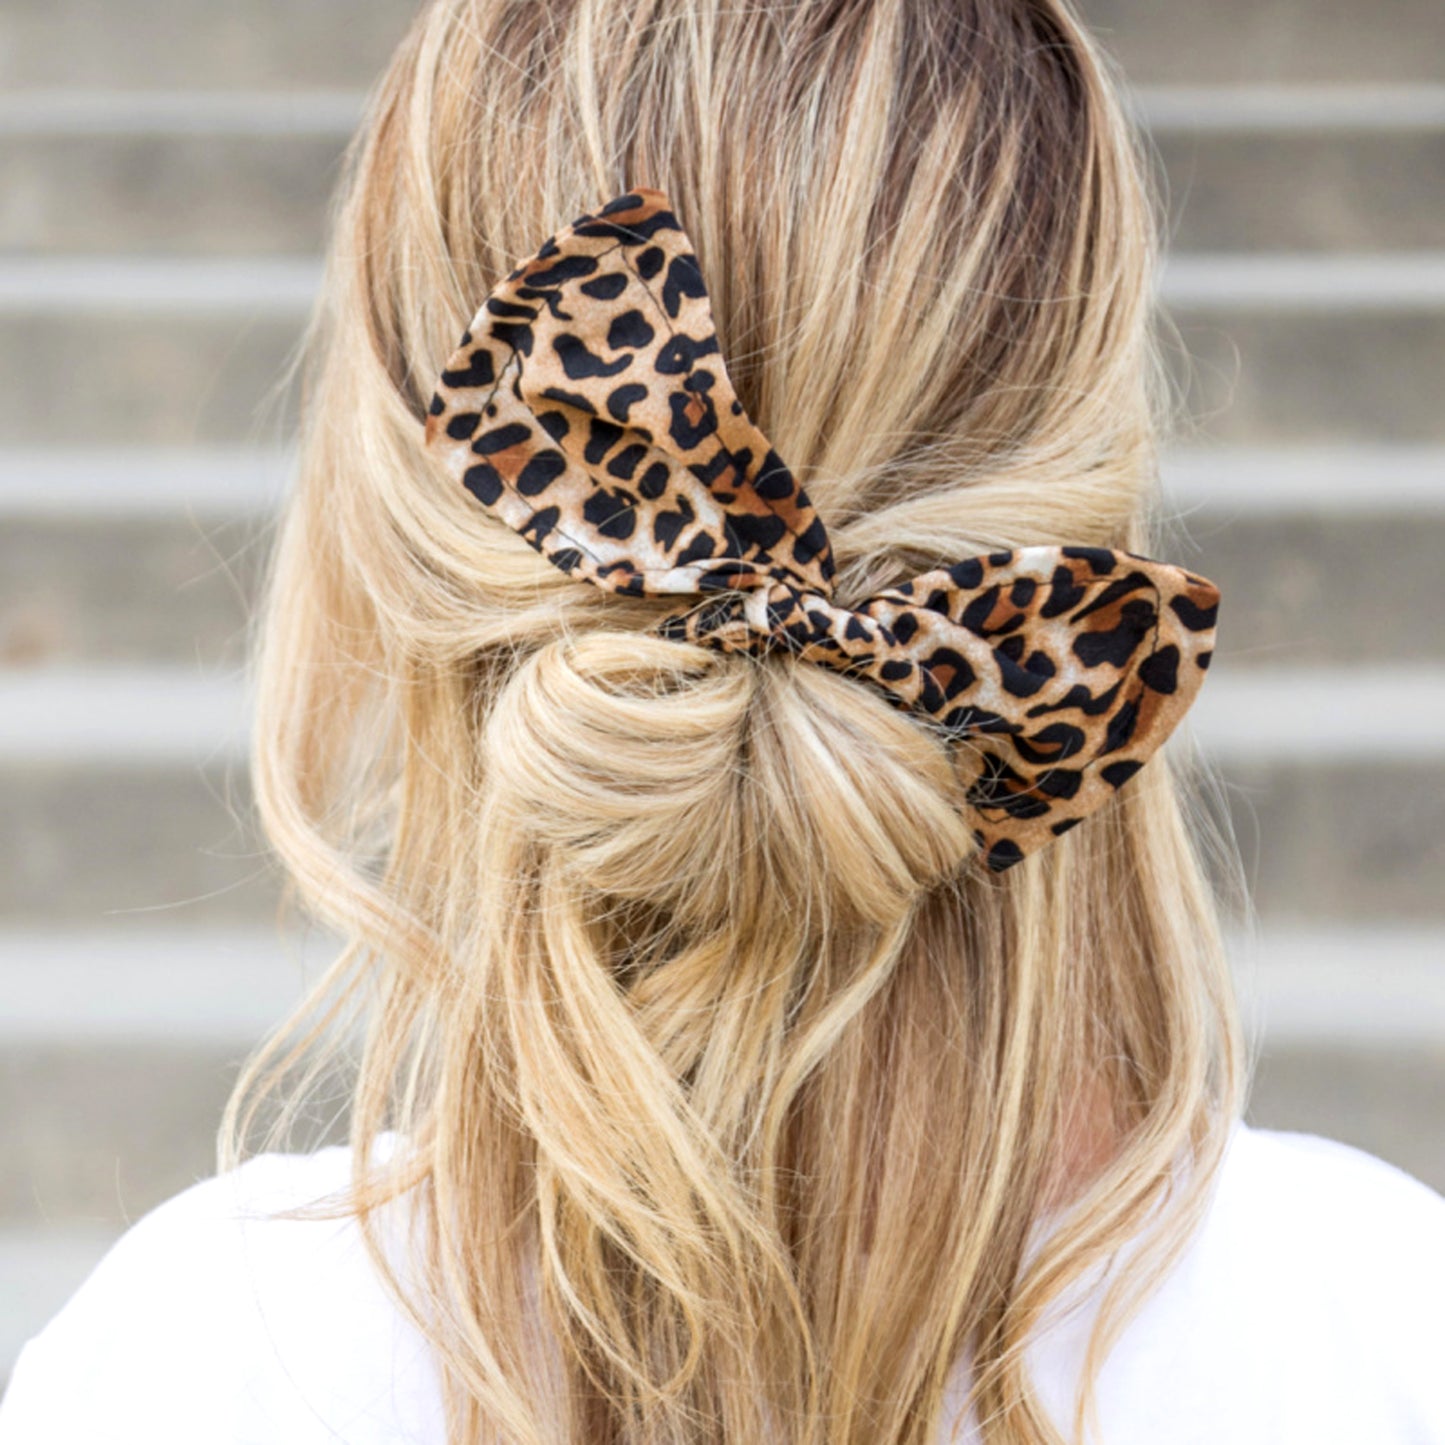 Roll Up Hair Wraps